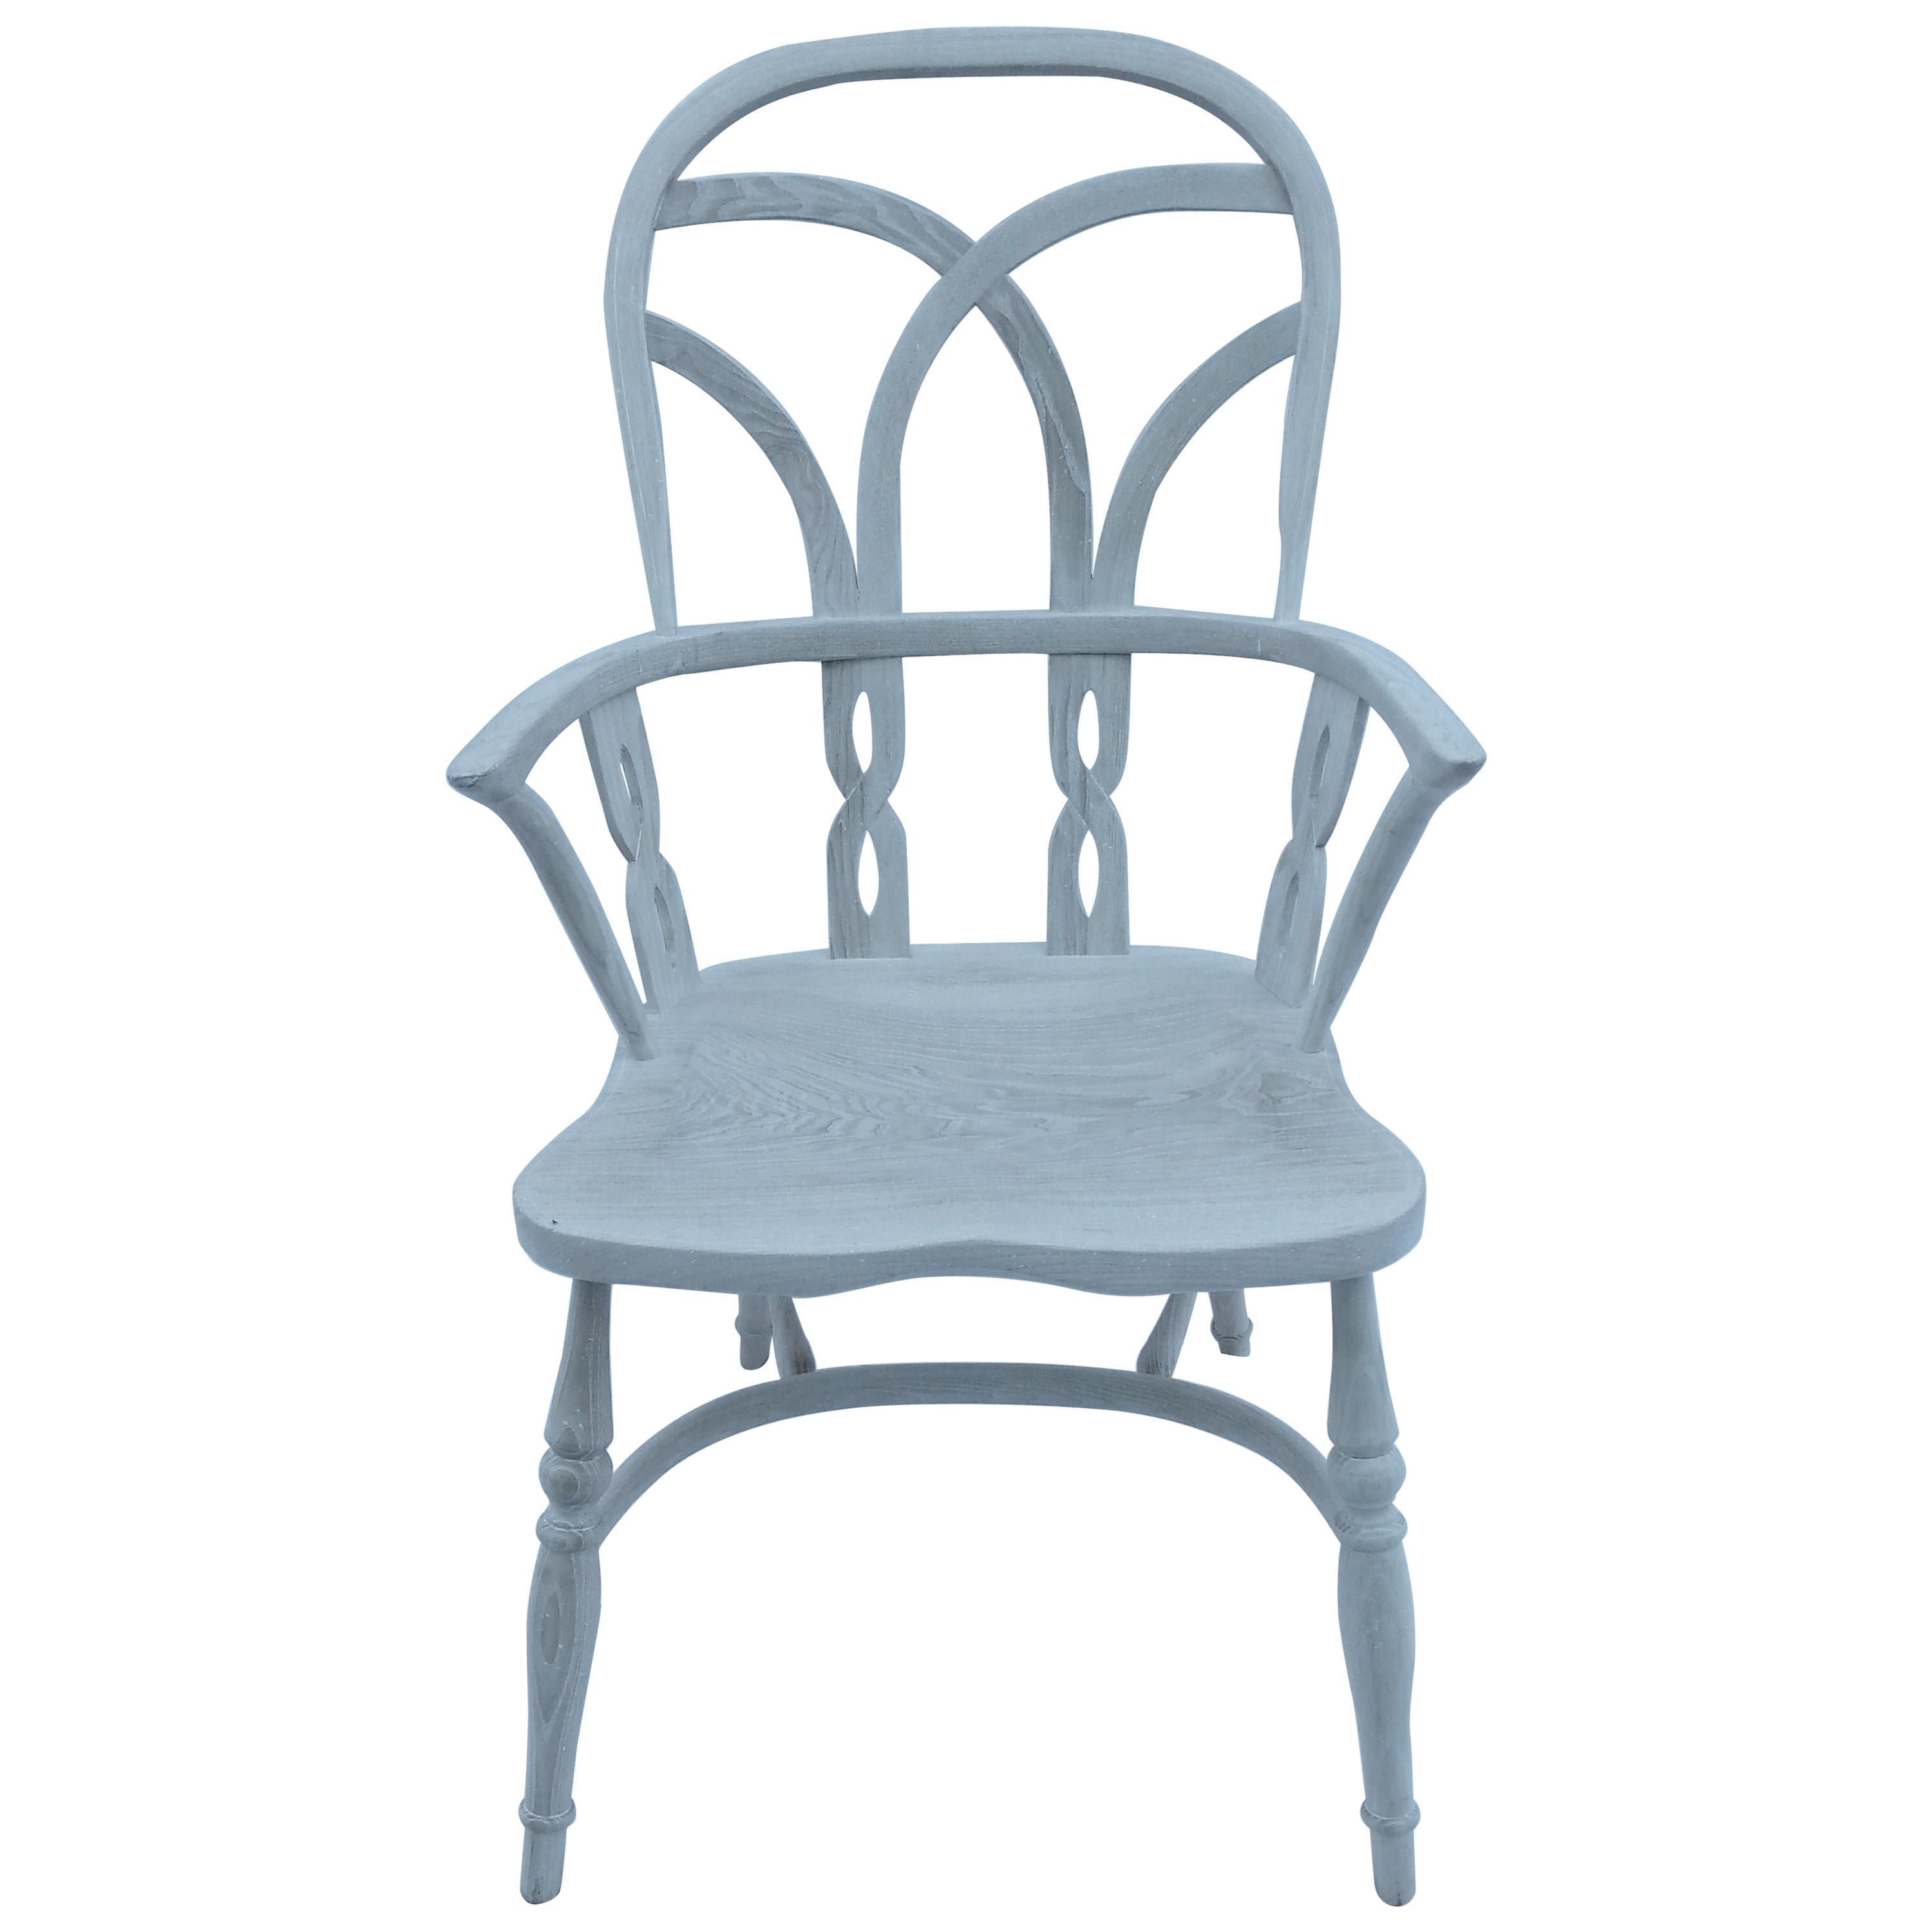 Reproduction Gothic Interlace Whitewash Chair with Arms For Sale